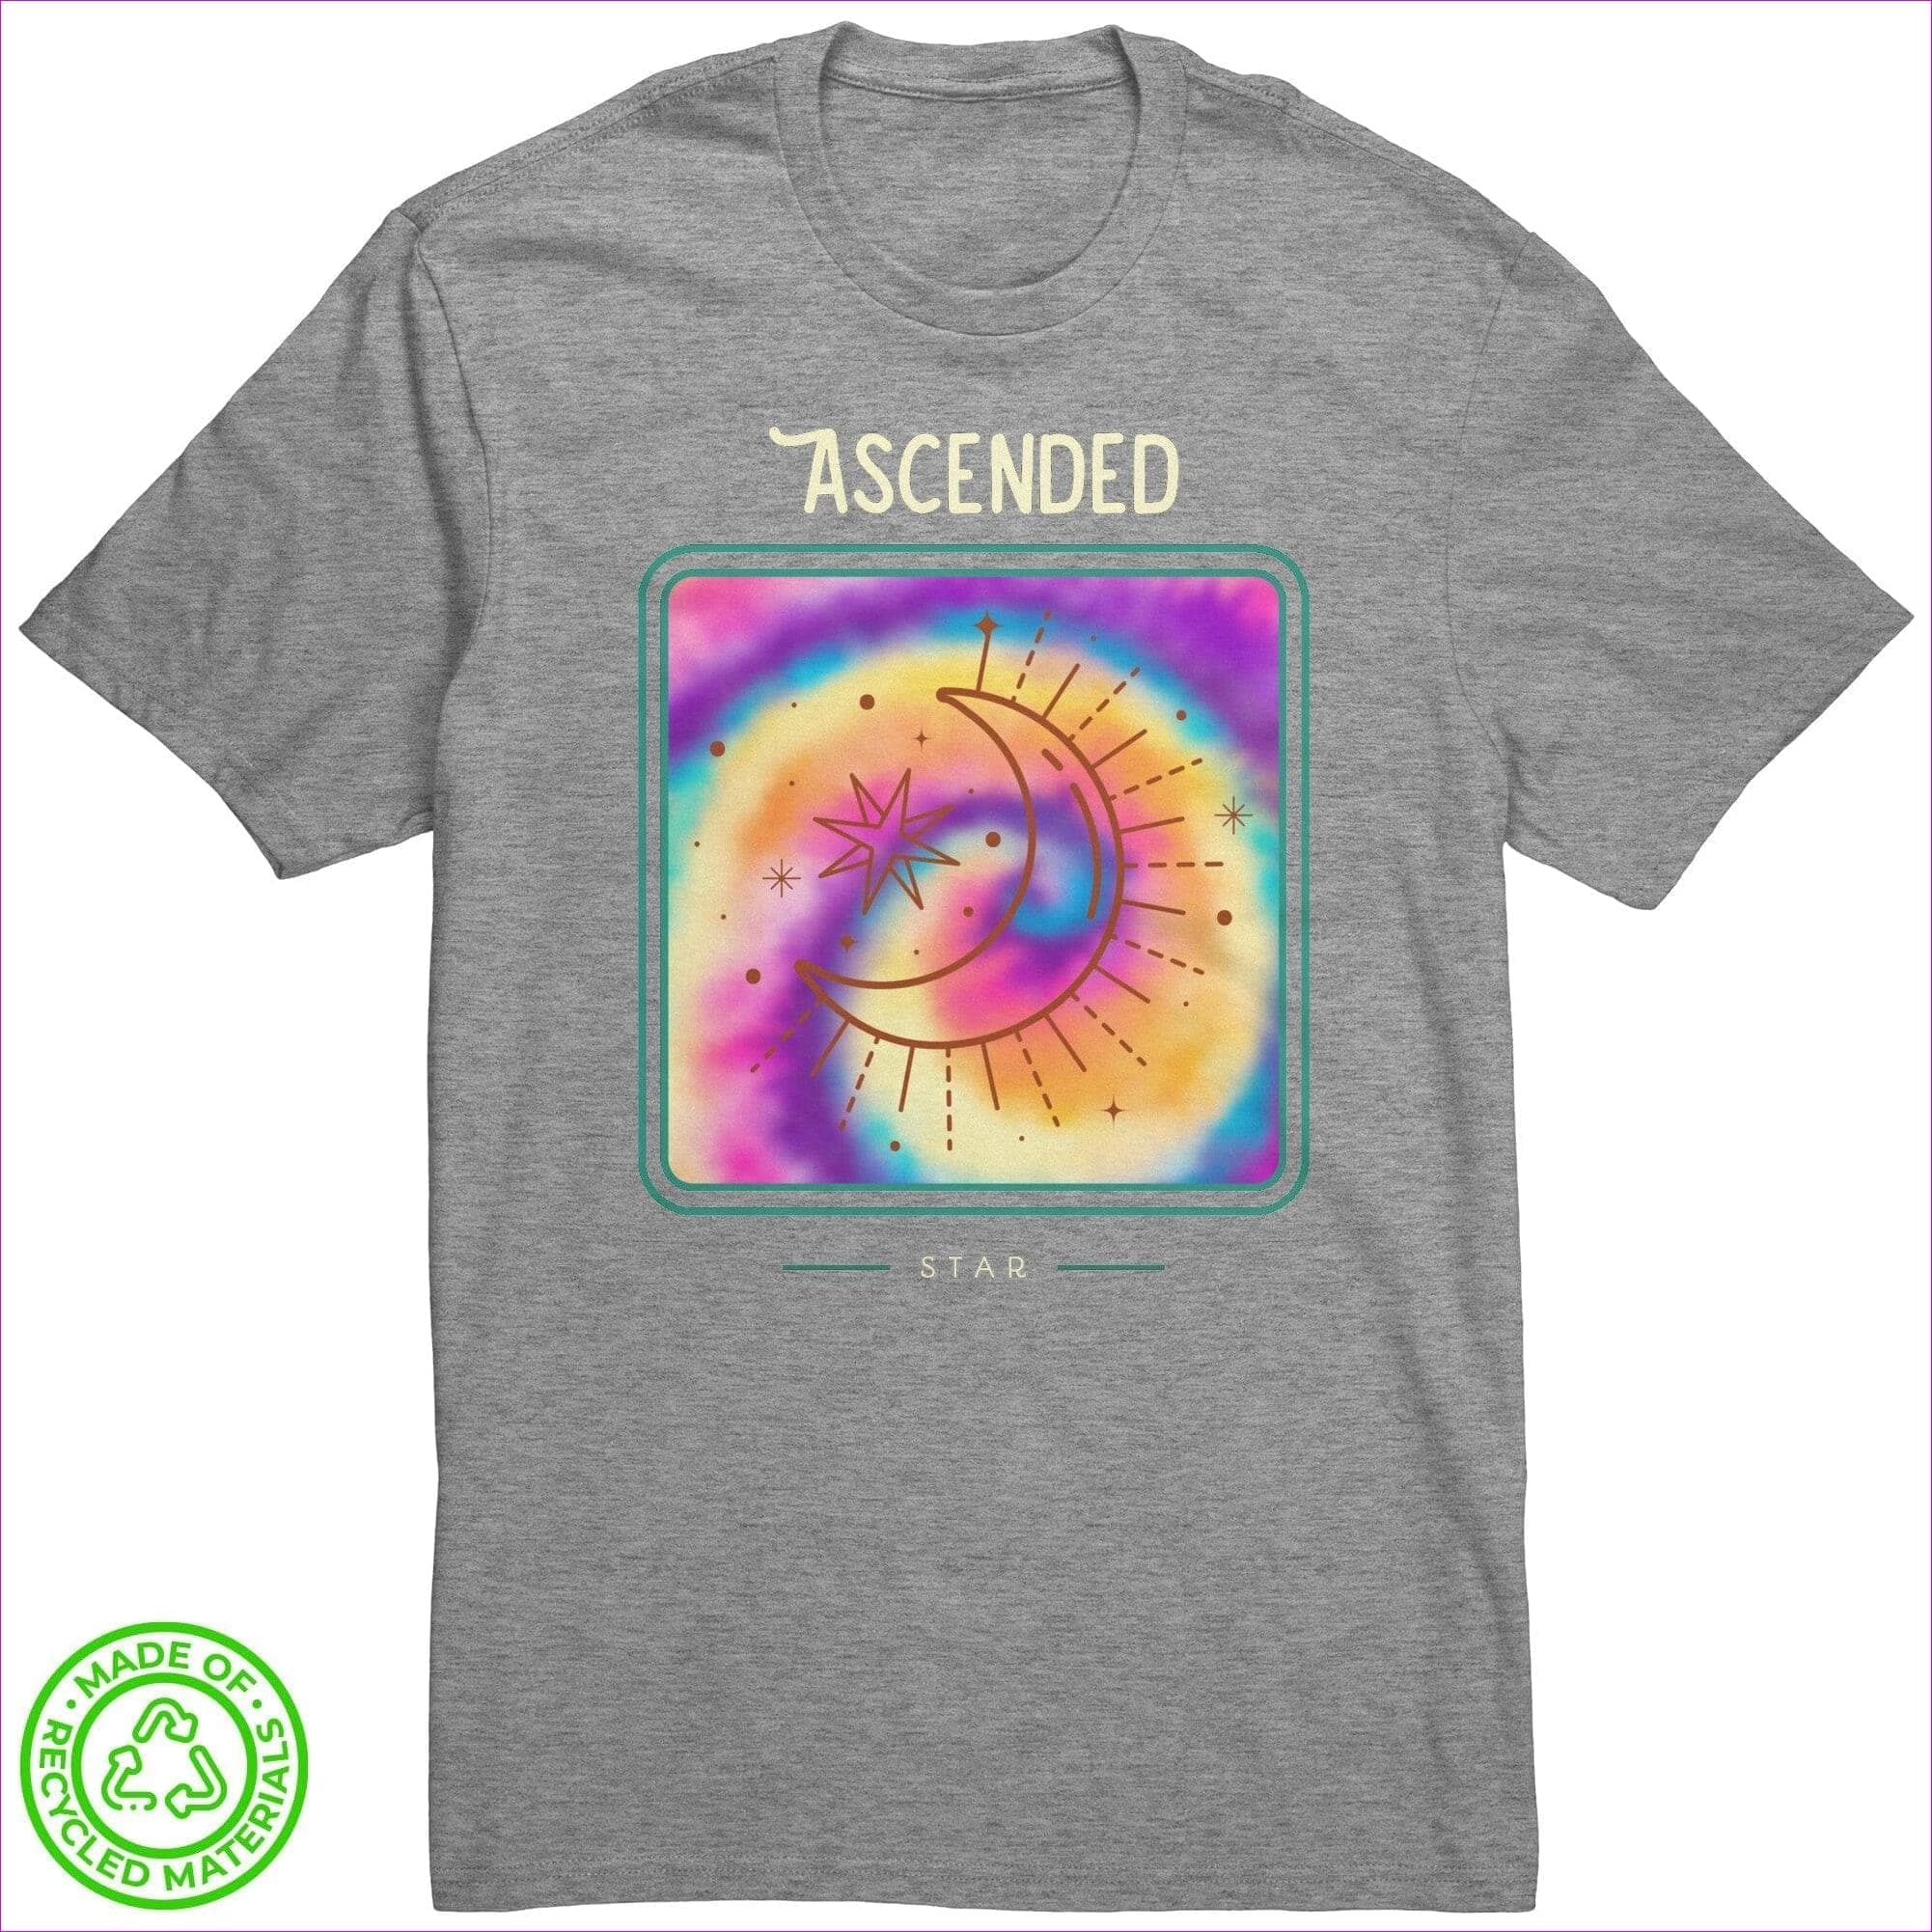 Light Heather Grey - Ascended Recycled Fabric Unisex Tee - Unisex T-Shirt at TFC&H Co.